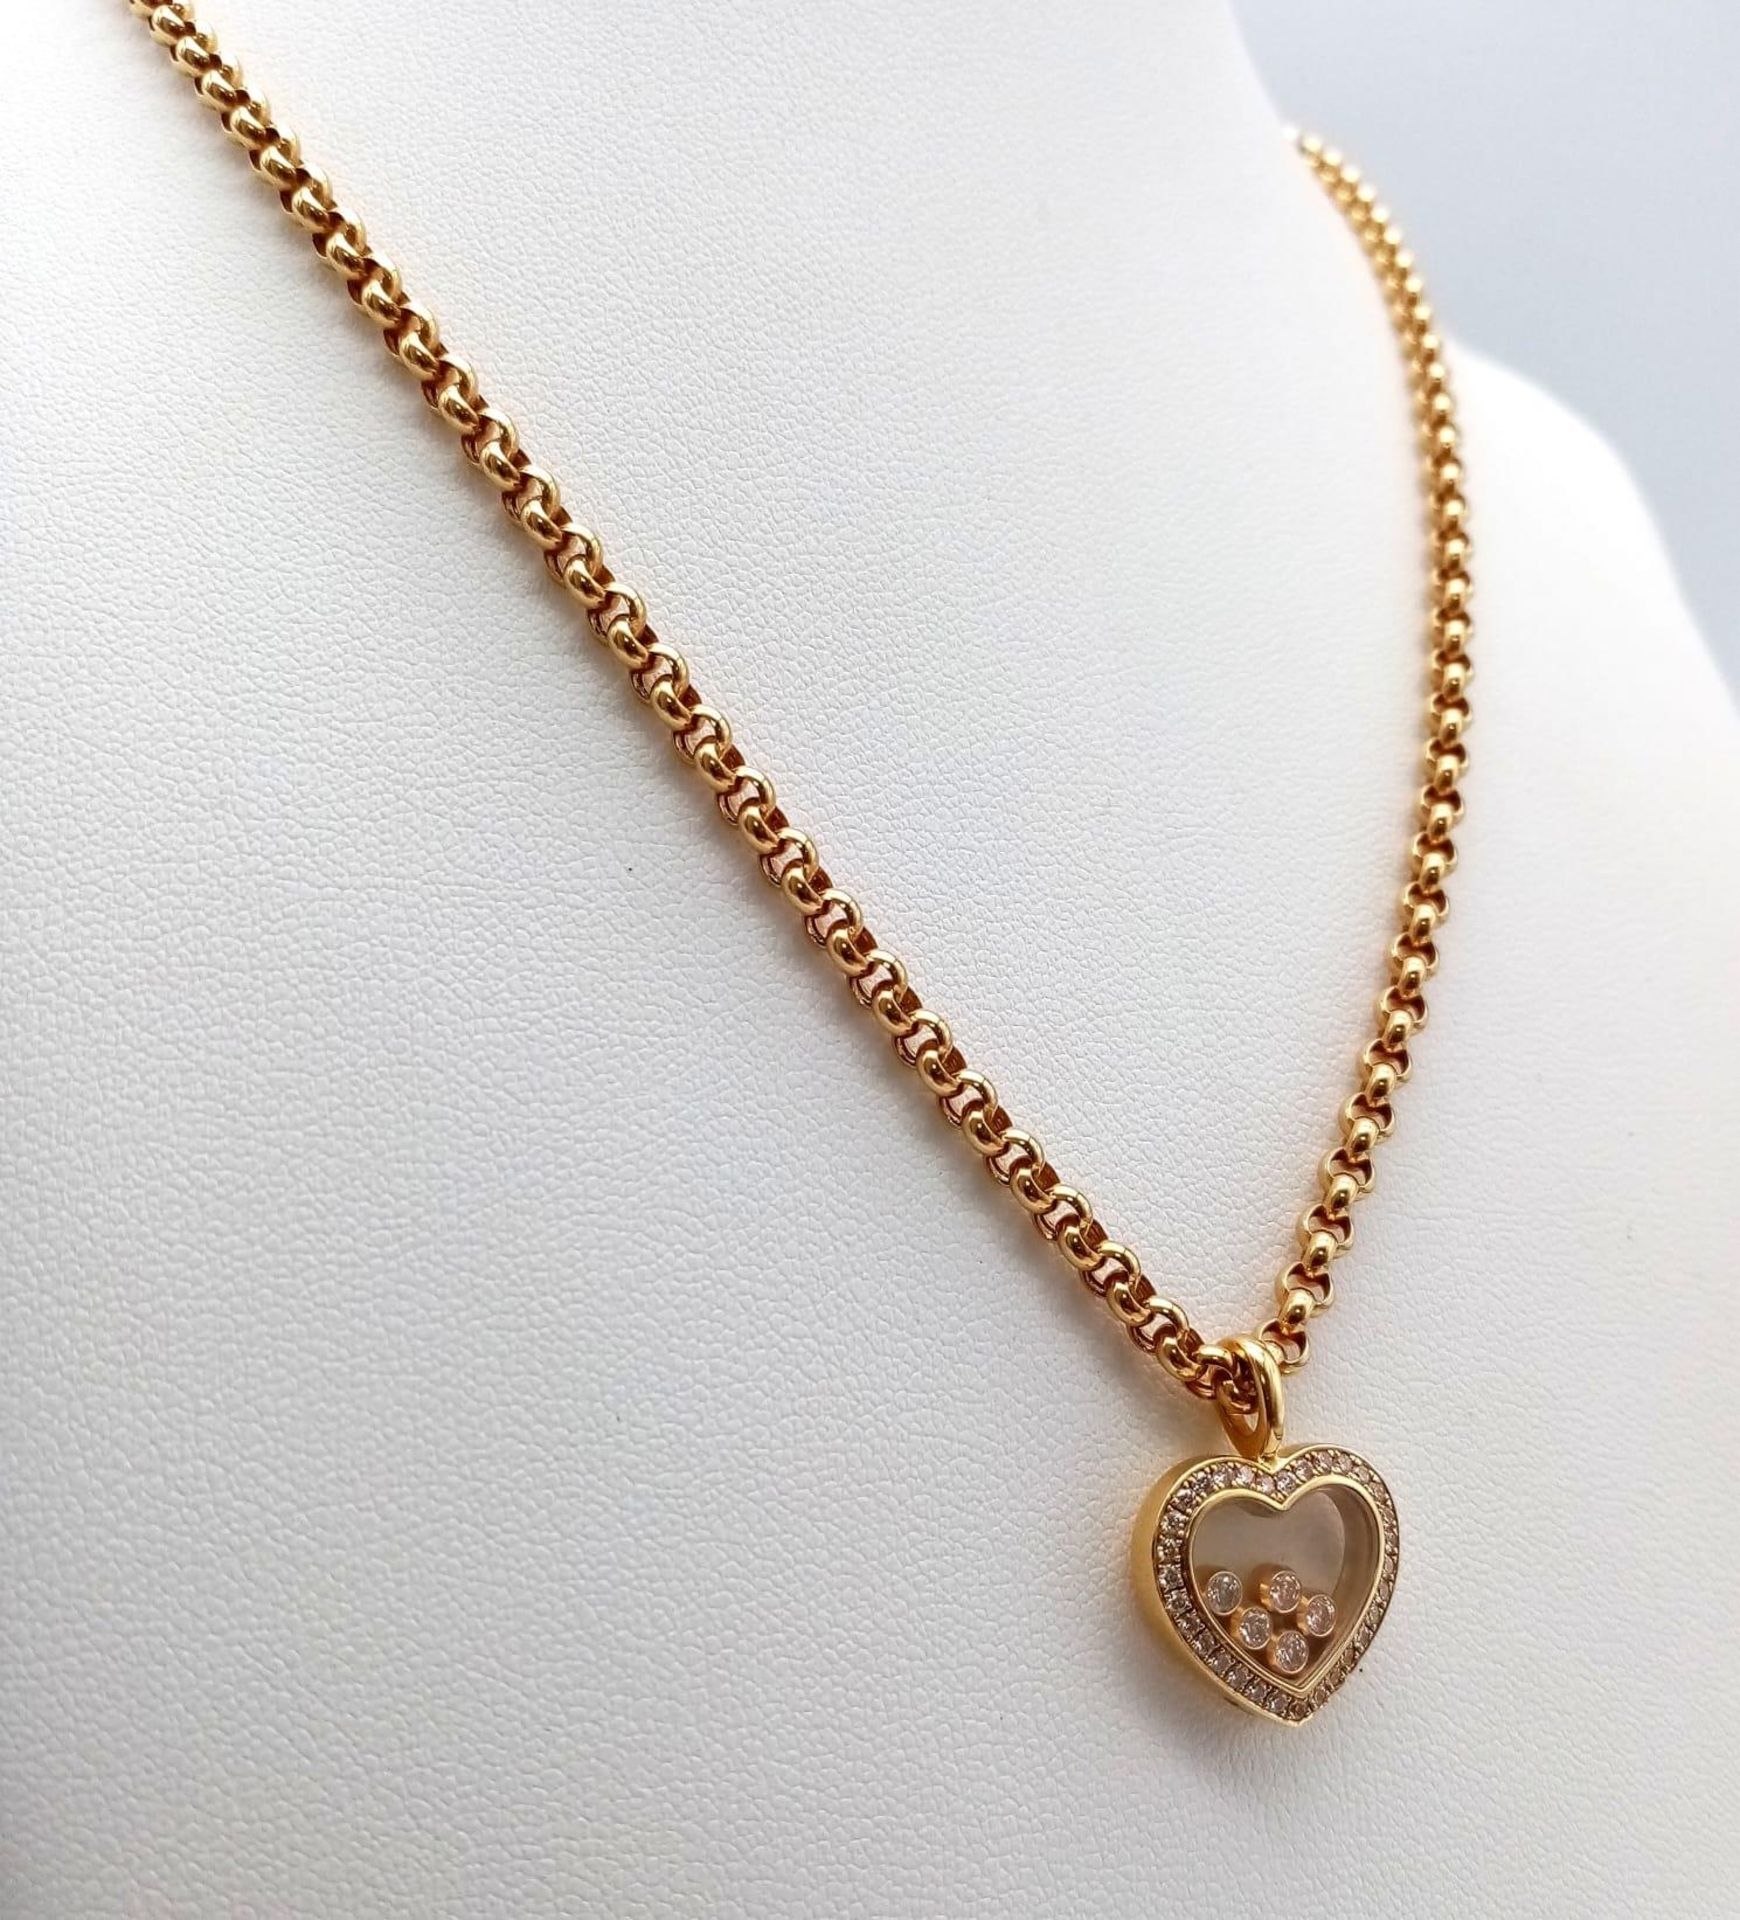 A Chopard 18K Yellow Gold and Floating Diamond Heart Pendant on an 18K Yellow Gold Belcher Link - Image 3 of 7